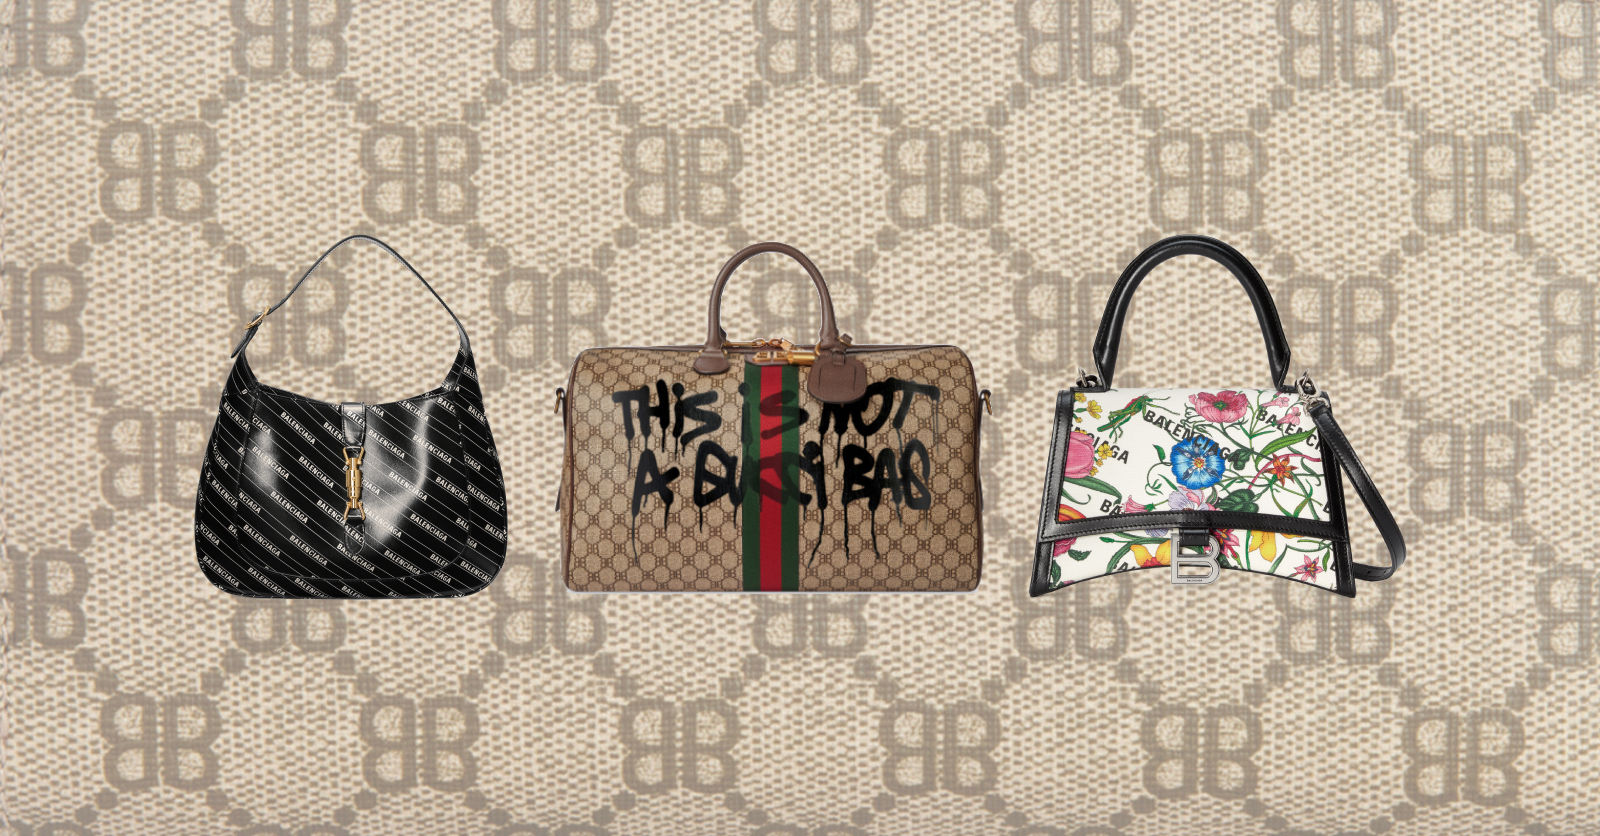 The Hacker Project From Gucci x Balenciaga Has Landed In Singapore